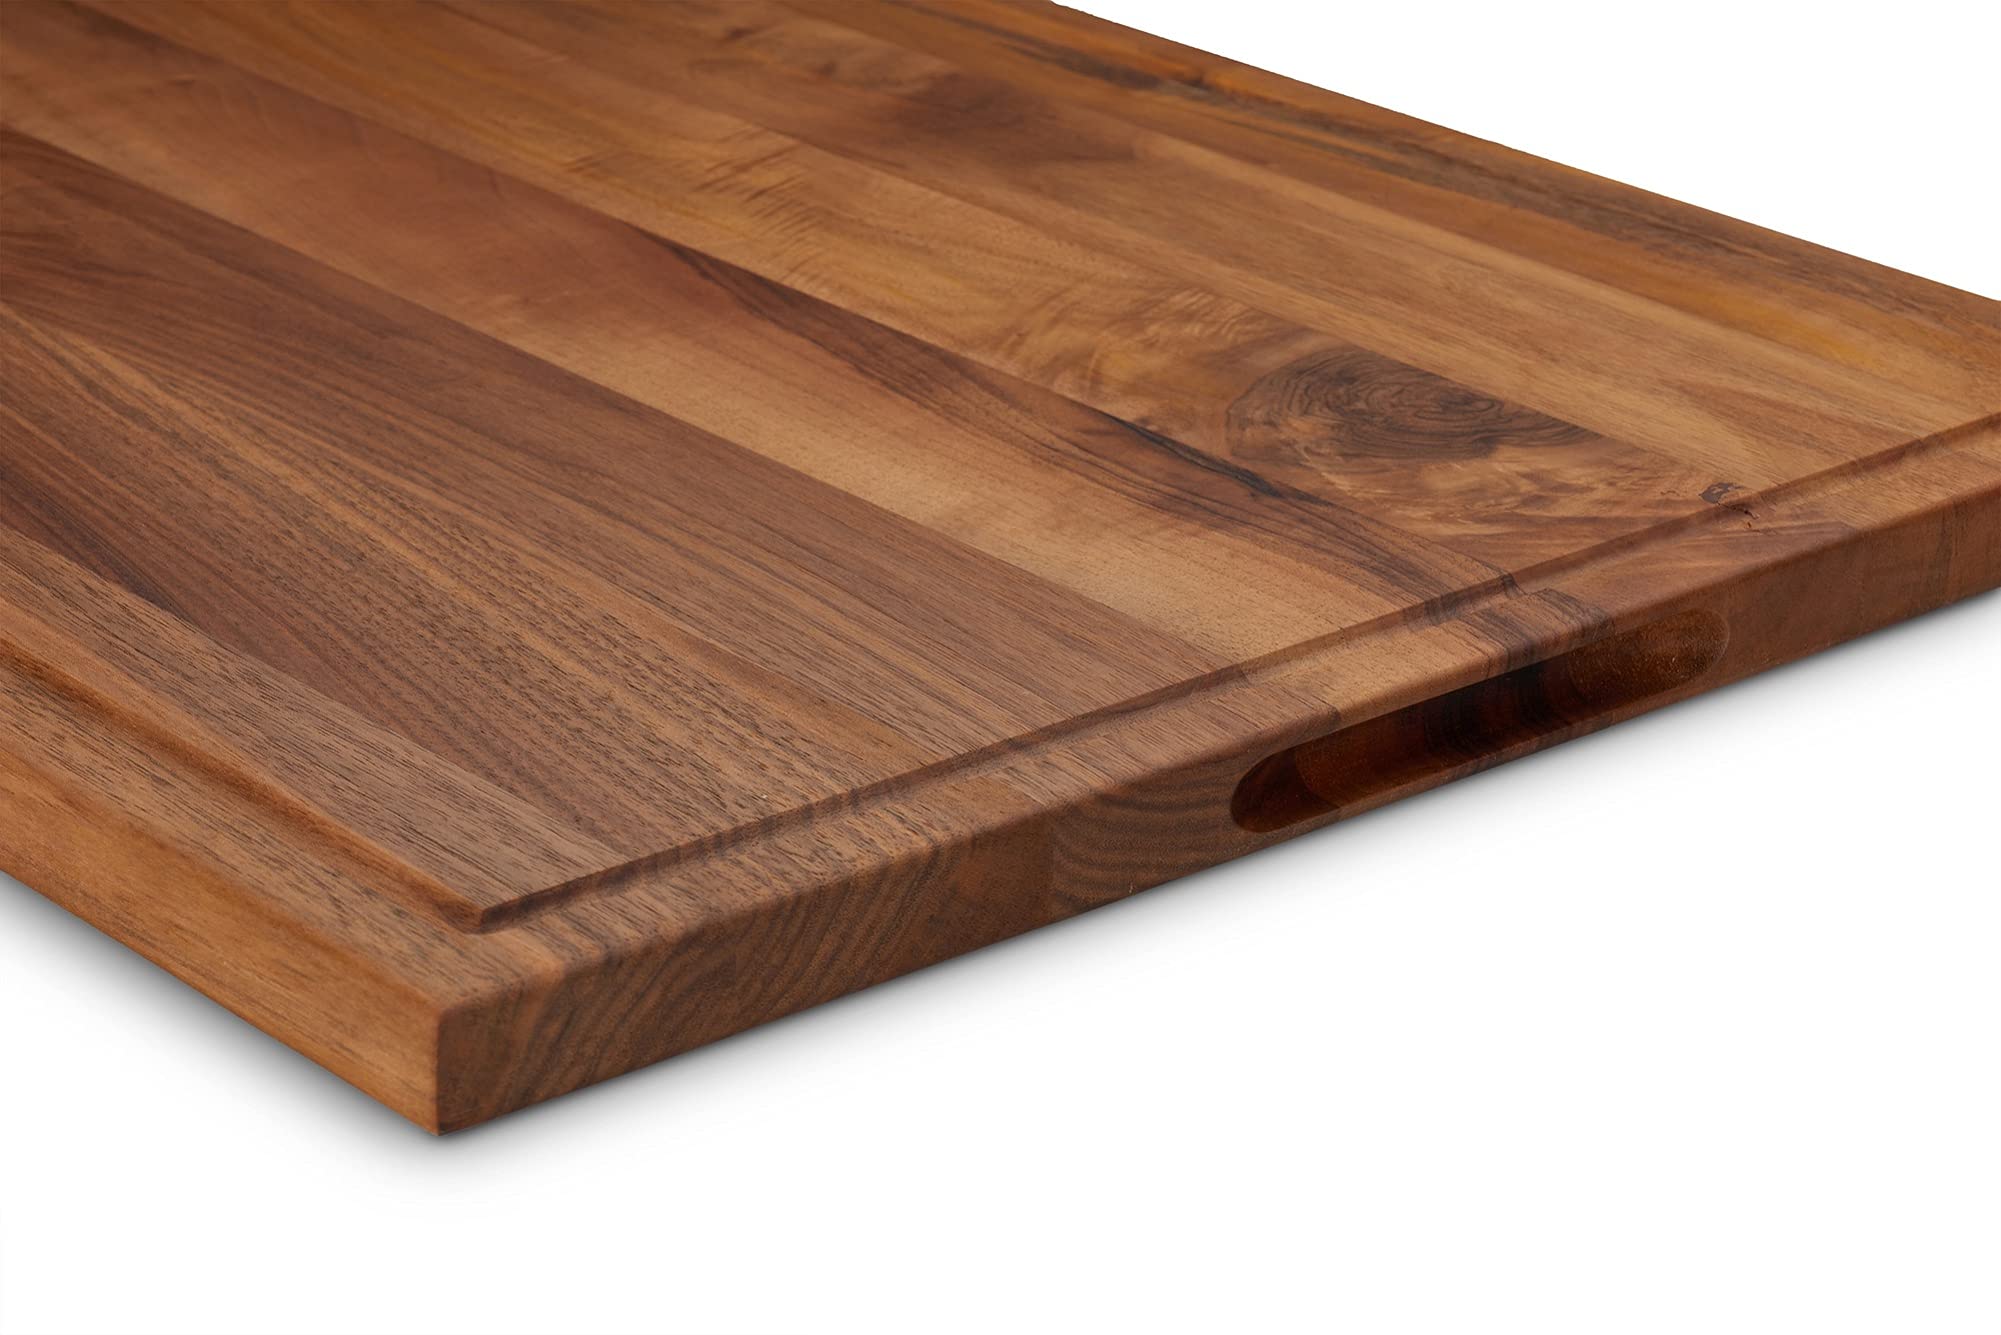 TeakCraft Large Walnut Cutting Board with Juice Grove, Chopping Board for Meat, Knife Friendly, Reversible, The Petra (20x15x1inch)